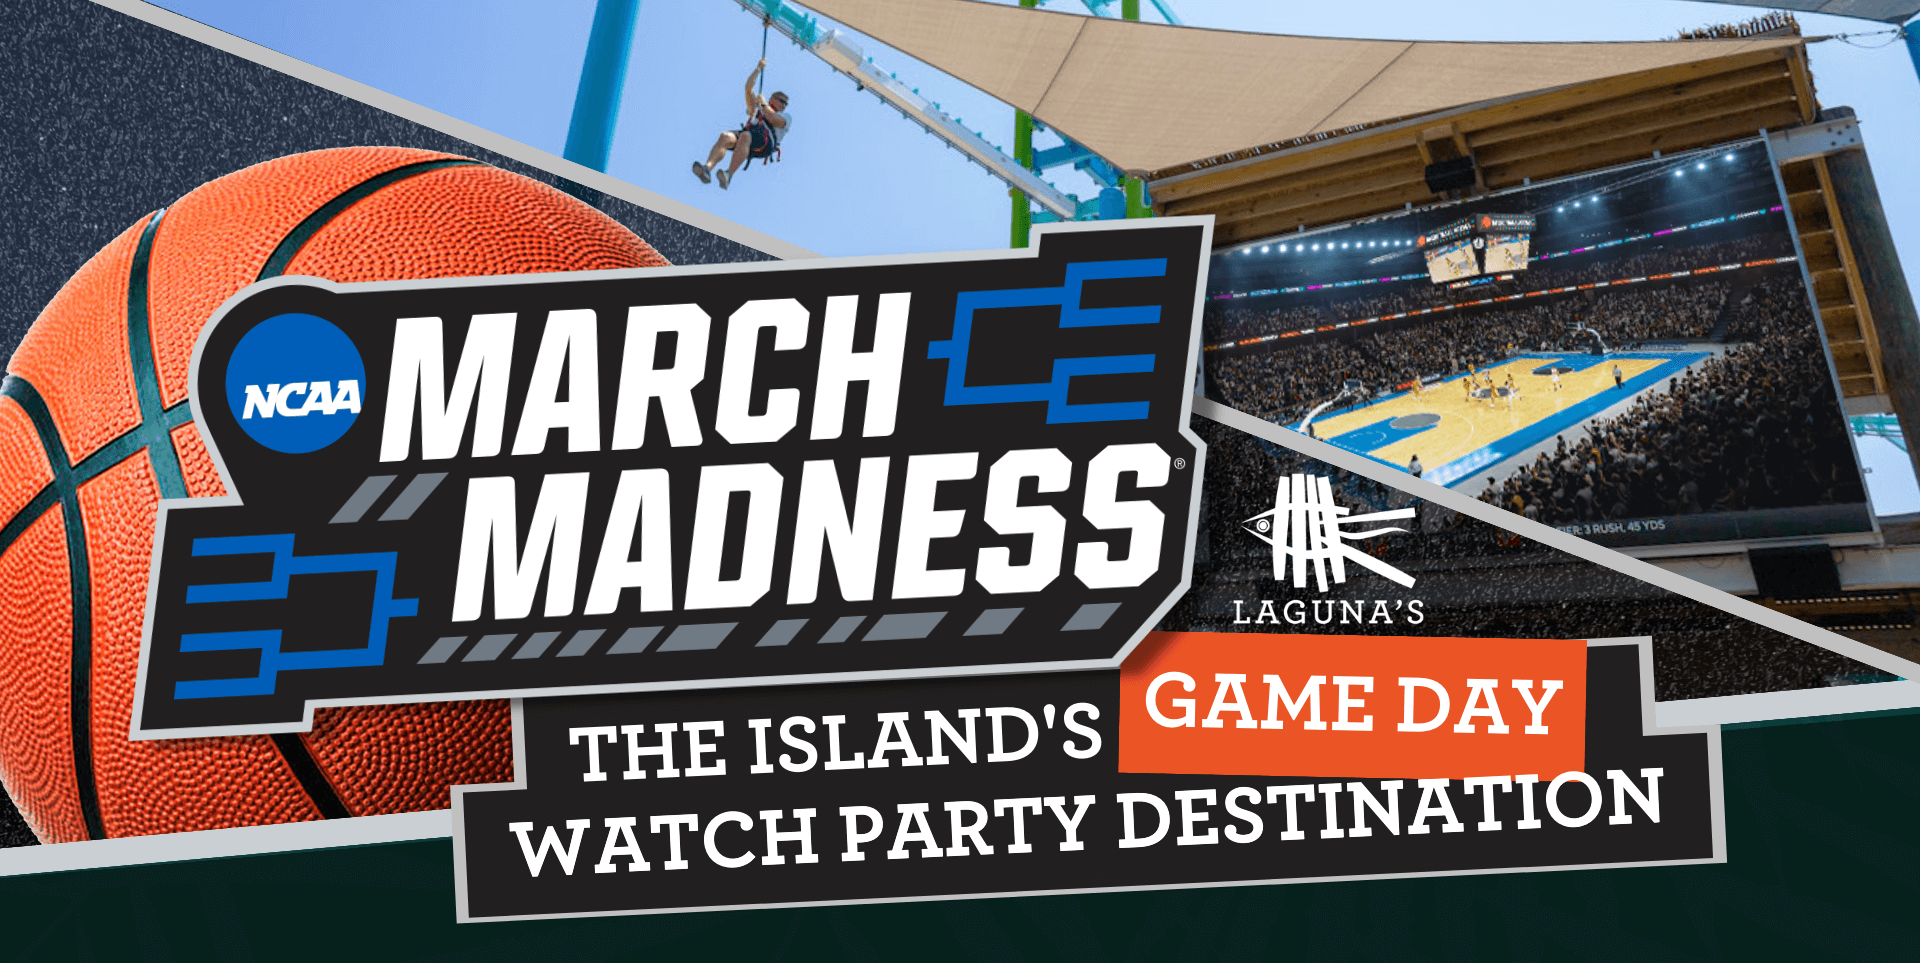 LG24-March Madness-web header (1920 × 963 px) (1).png